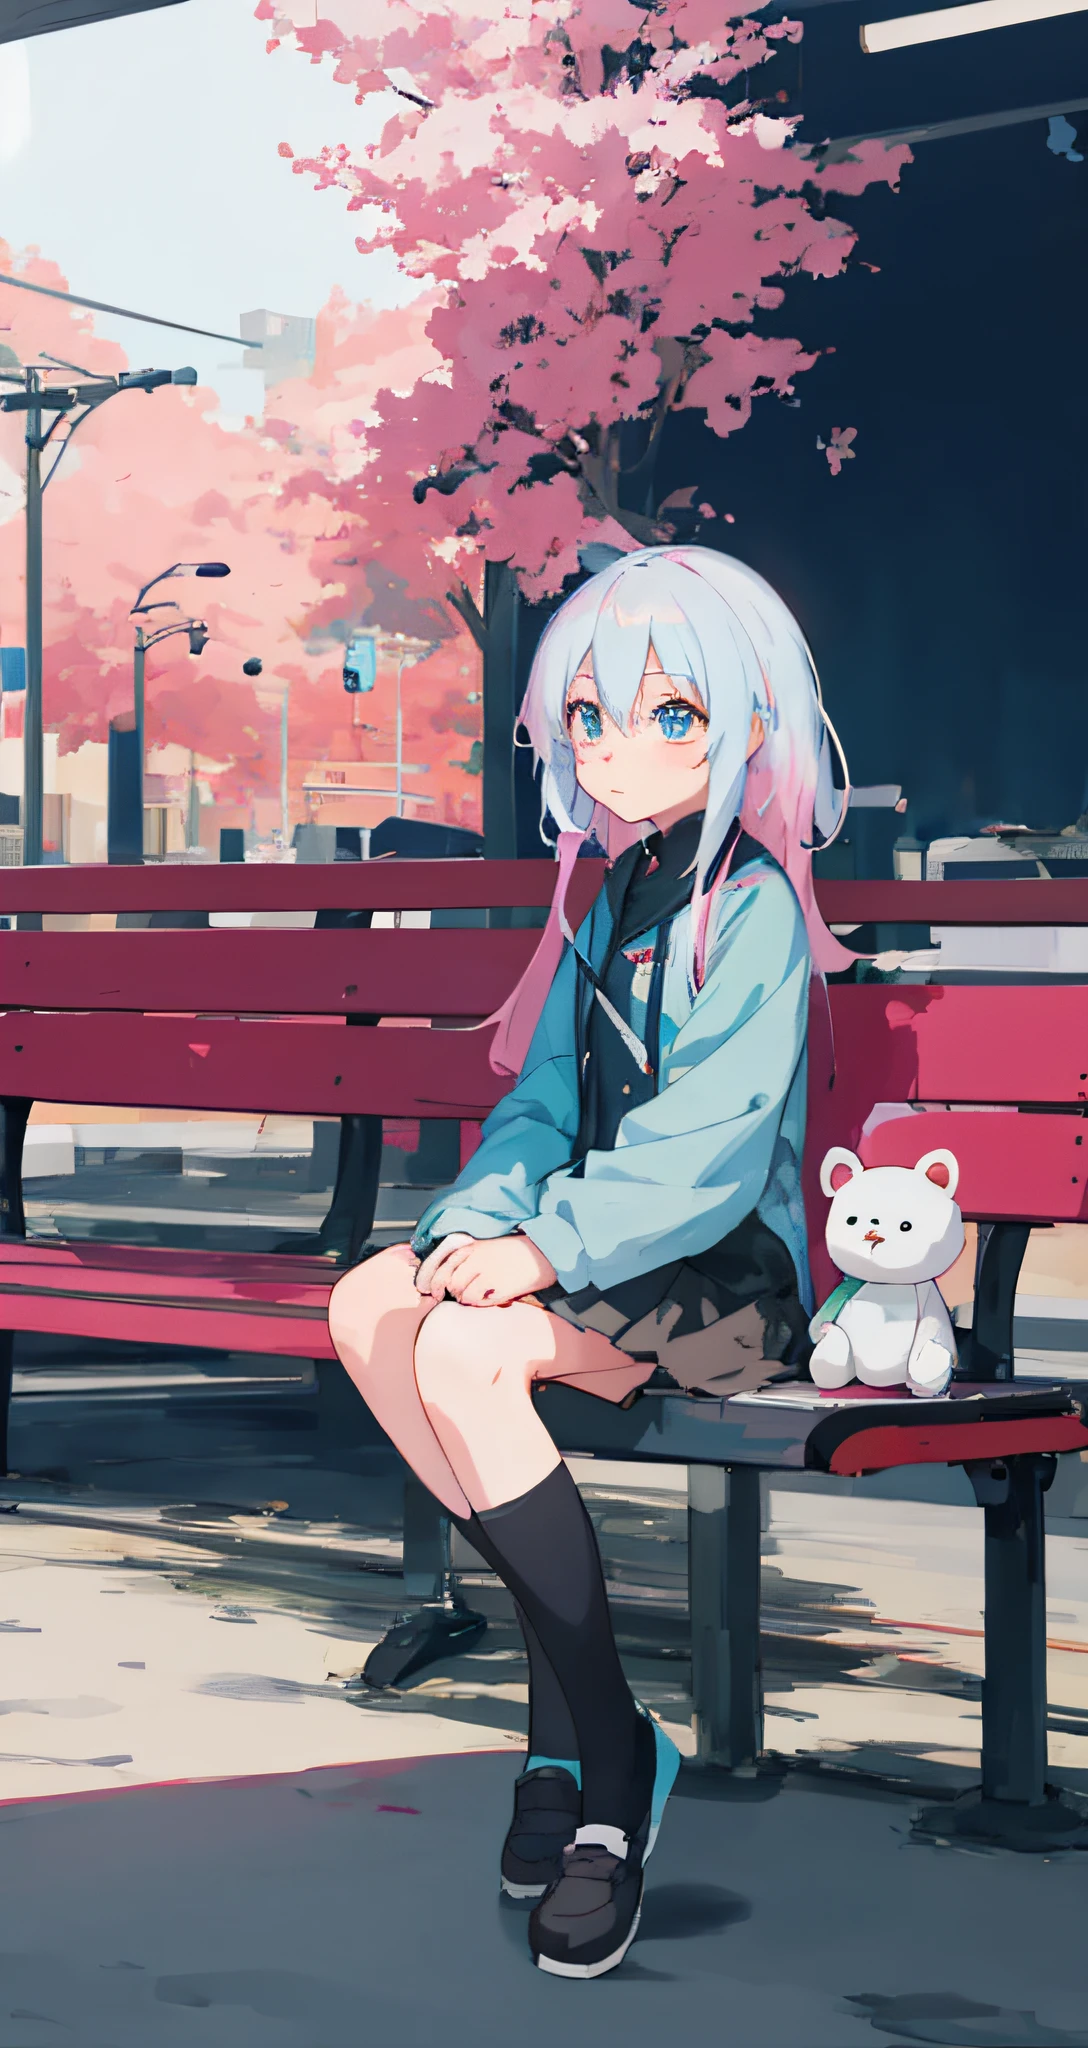 anime girl sitting on a bench with a stuffed animal, anime style 4 k, anime style. 8k, anime moe artstyle, anime style illustration, anime art style, anime art wallpaper 8 k, anime artstyle, artwork in the style of guweiz, 2 d anime style, anime art wallpaper 4 k, anime art wallpaper 4k, in anime style